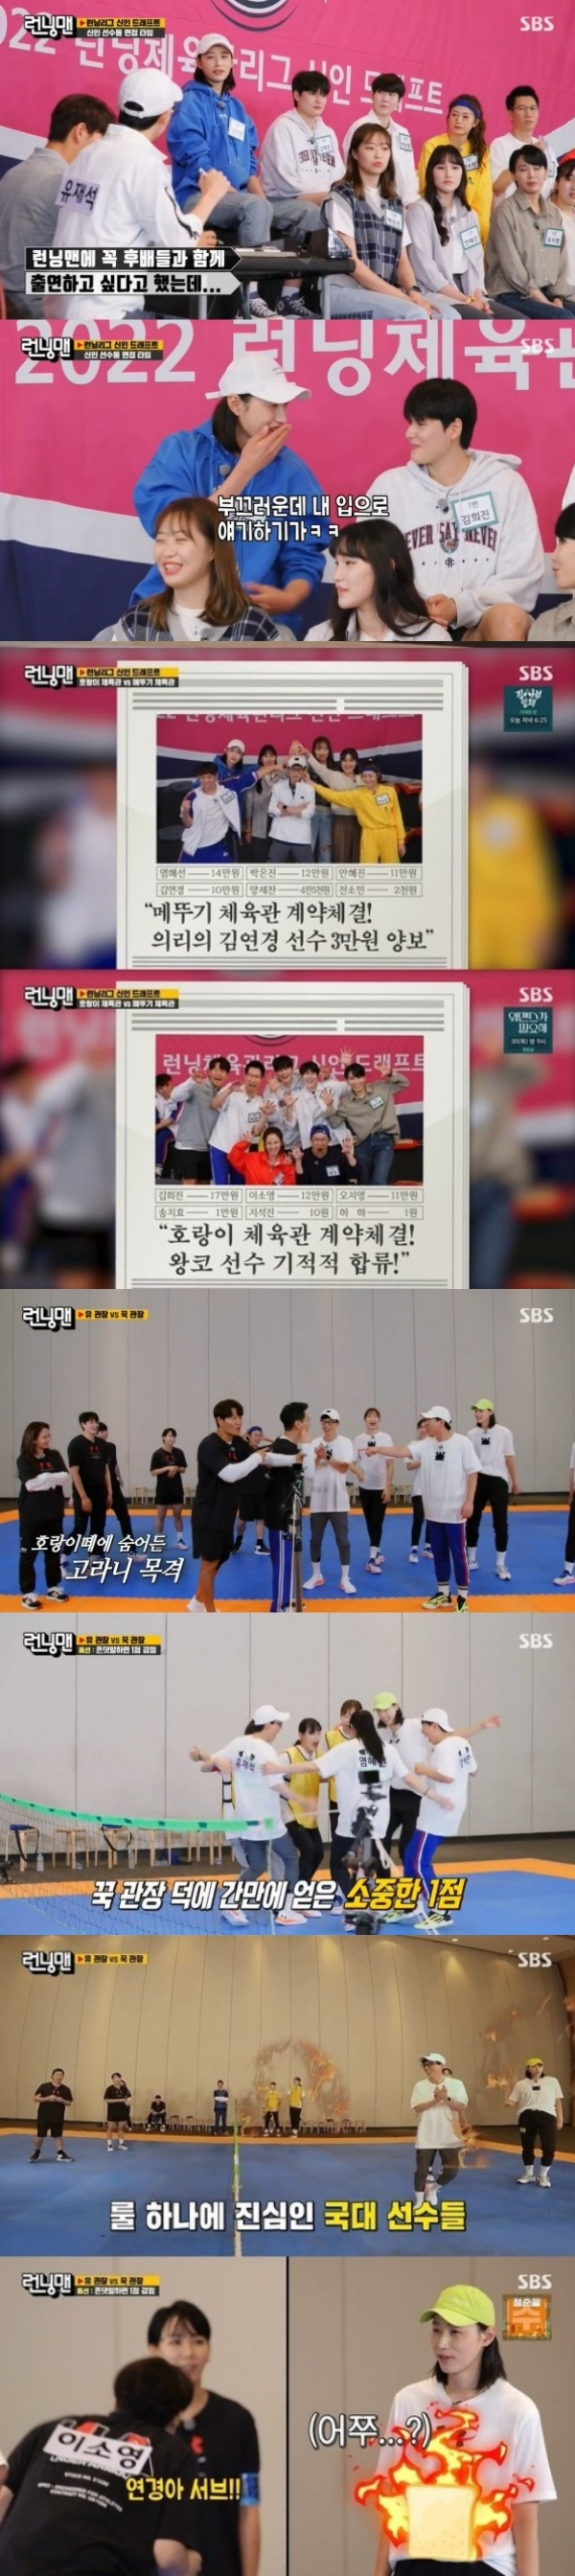 According to Nielsen Korea, a TV viewer rating research institute on the 27th, SBS entertainment program Running Man, which was broadcast on the 26th, recorded 6.3% of TV viewer ratings (hereinafter based on Nielsen Korea Seoul Capital Area, furniture), and ranked first in entertainment in the same time zone. The company recorded 4.2% (Nilson Korea Seoul Capital Area, based on household standards), which ranked first in the same time zone as well as the top in Sunday entertainment, and the highest TV viewer ratings per minute jumped to 9.4%.The broadcast was decorated with the 2022 running UEFA Champions League rookie draft, and the womens volleyball team Kim Yeon-koung, Kim Hee-jin, Oh Ji-young, Yeum Hye-Seon, Park Eun-jin, Ahn Hye-jin and Lee So-young all appeared. I cheered.Kim Yeon-koung said, I hear a lot of stories about Lee Kwang-soo, I will fill the vacancy today.The draft, which was made up of a surprise progress by Jung Woo-young caster, was made up of a team with Yoo Jae-Suk, who was reborn as an executive director according to the race results last week.Kim Jong-kook had to negotiate Salary with the players with 990,000 One, Yoo Jae-Suk silver 1.3 million One, and the players had to have a volleyball before the draft and have to be evaluated by Choices for speed and playing.If the Running Man members laughed, the volleyball team players showed a quick spike and showed their ability to play.Kim Hee-jin, who showed 70km / h, chose to go to the tiger gym at the top Salary 170,000 One, and Oh Ji Young, Lee So Young, Haha, Ji Suk-jin and Song Ji-hyo also joined.Kim Yeon-koung, 60km/h, offered his Salary 30,000 One to join Yang Se-chan to Choices the Grasshop Gym.Park Eun-jin, Yeum Hye-Seon, Ahn Hye-jin and Jeon So-min also headed to the grasshopper gym.The first Battle was a football: a hand-held Libero, with both teams Choices Haha and Kim Yeon-koung and added tension to the intense rally from the start.However, the unexpected option Do not write honorific words emerged as a variable, and Kim Jong-kook and Yoo Jae-Suk, the two teams, fell into Kim Jong-kook and Yoo Jae-Suk are horrified every time they make a mistake, and each time they score, they are tired of the energy of the players who show that world tension and foreshadow the tough battle of the future.In particular, Kim Yeon-koung bombarded the nagging scene when Yoo Jae-Suk made a mistake with rib blocking, and the scene took the best minute with 9.4% of the best TV viewer ratings per minute.Next weeks show will be followed by a fiery battle of both gymnasts with the final result of the foot volleyball Battle.